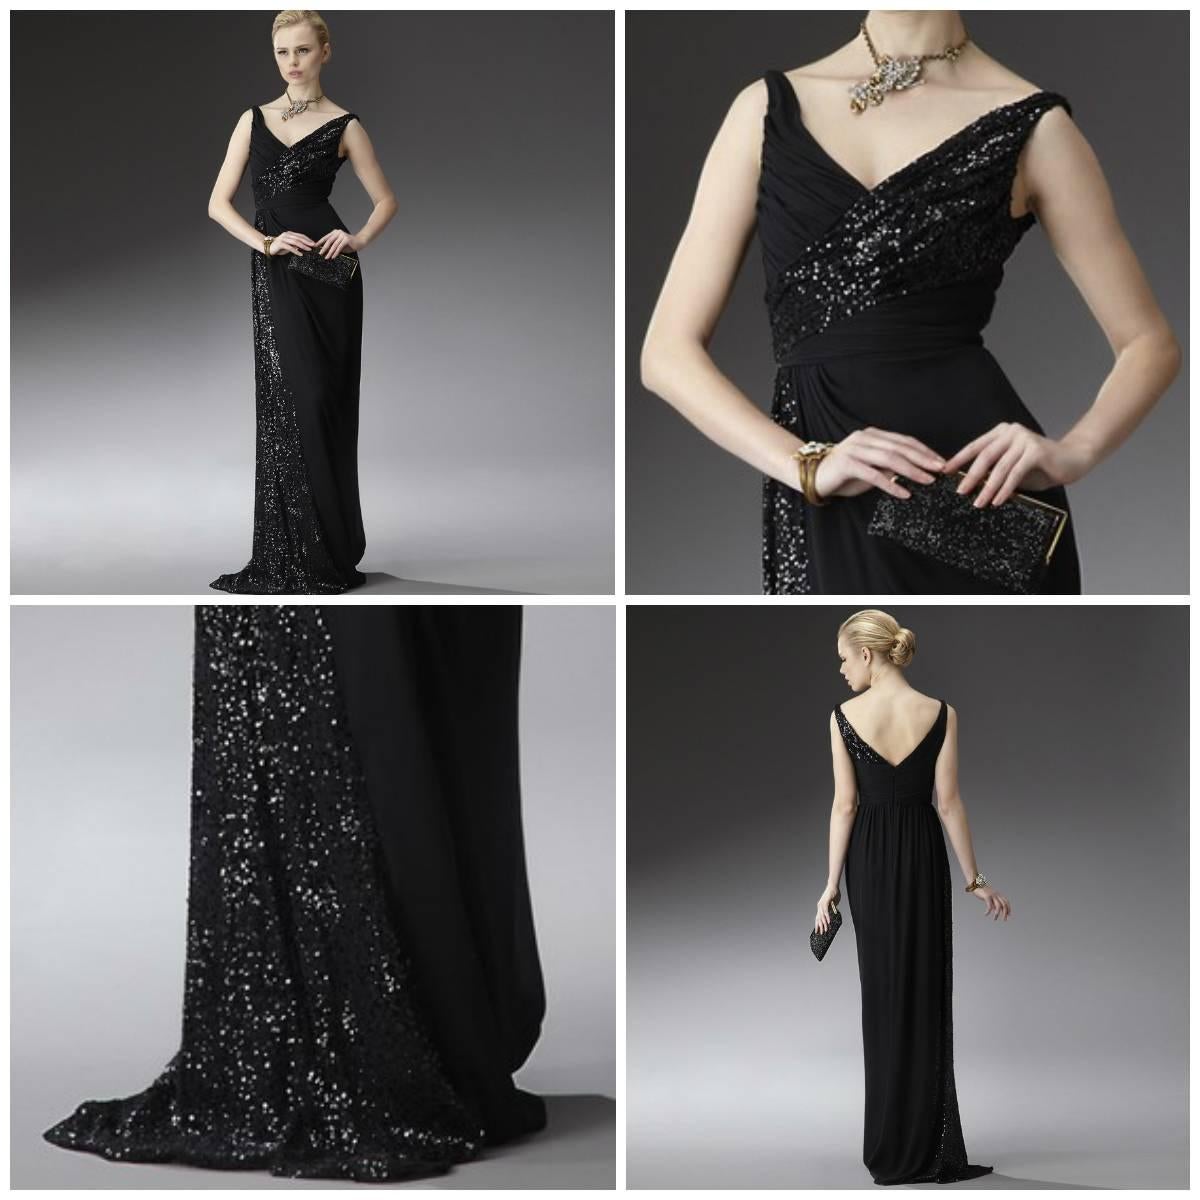 Badgley Mischka Gown
Brand New with Tags
Shell: 100% Silk
Lining: 100% Polyester
Sequined Neckline Flowing down one side and at back strap
Zipper and Hook Closure
It's Stunning!
We are happy to provide measurements upon request
